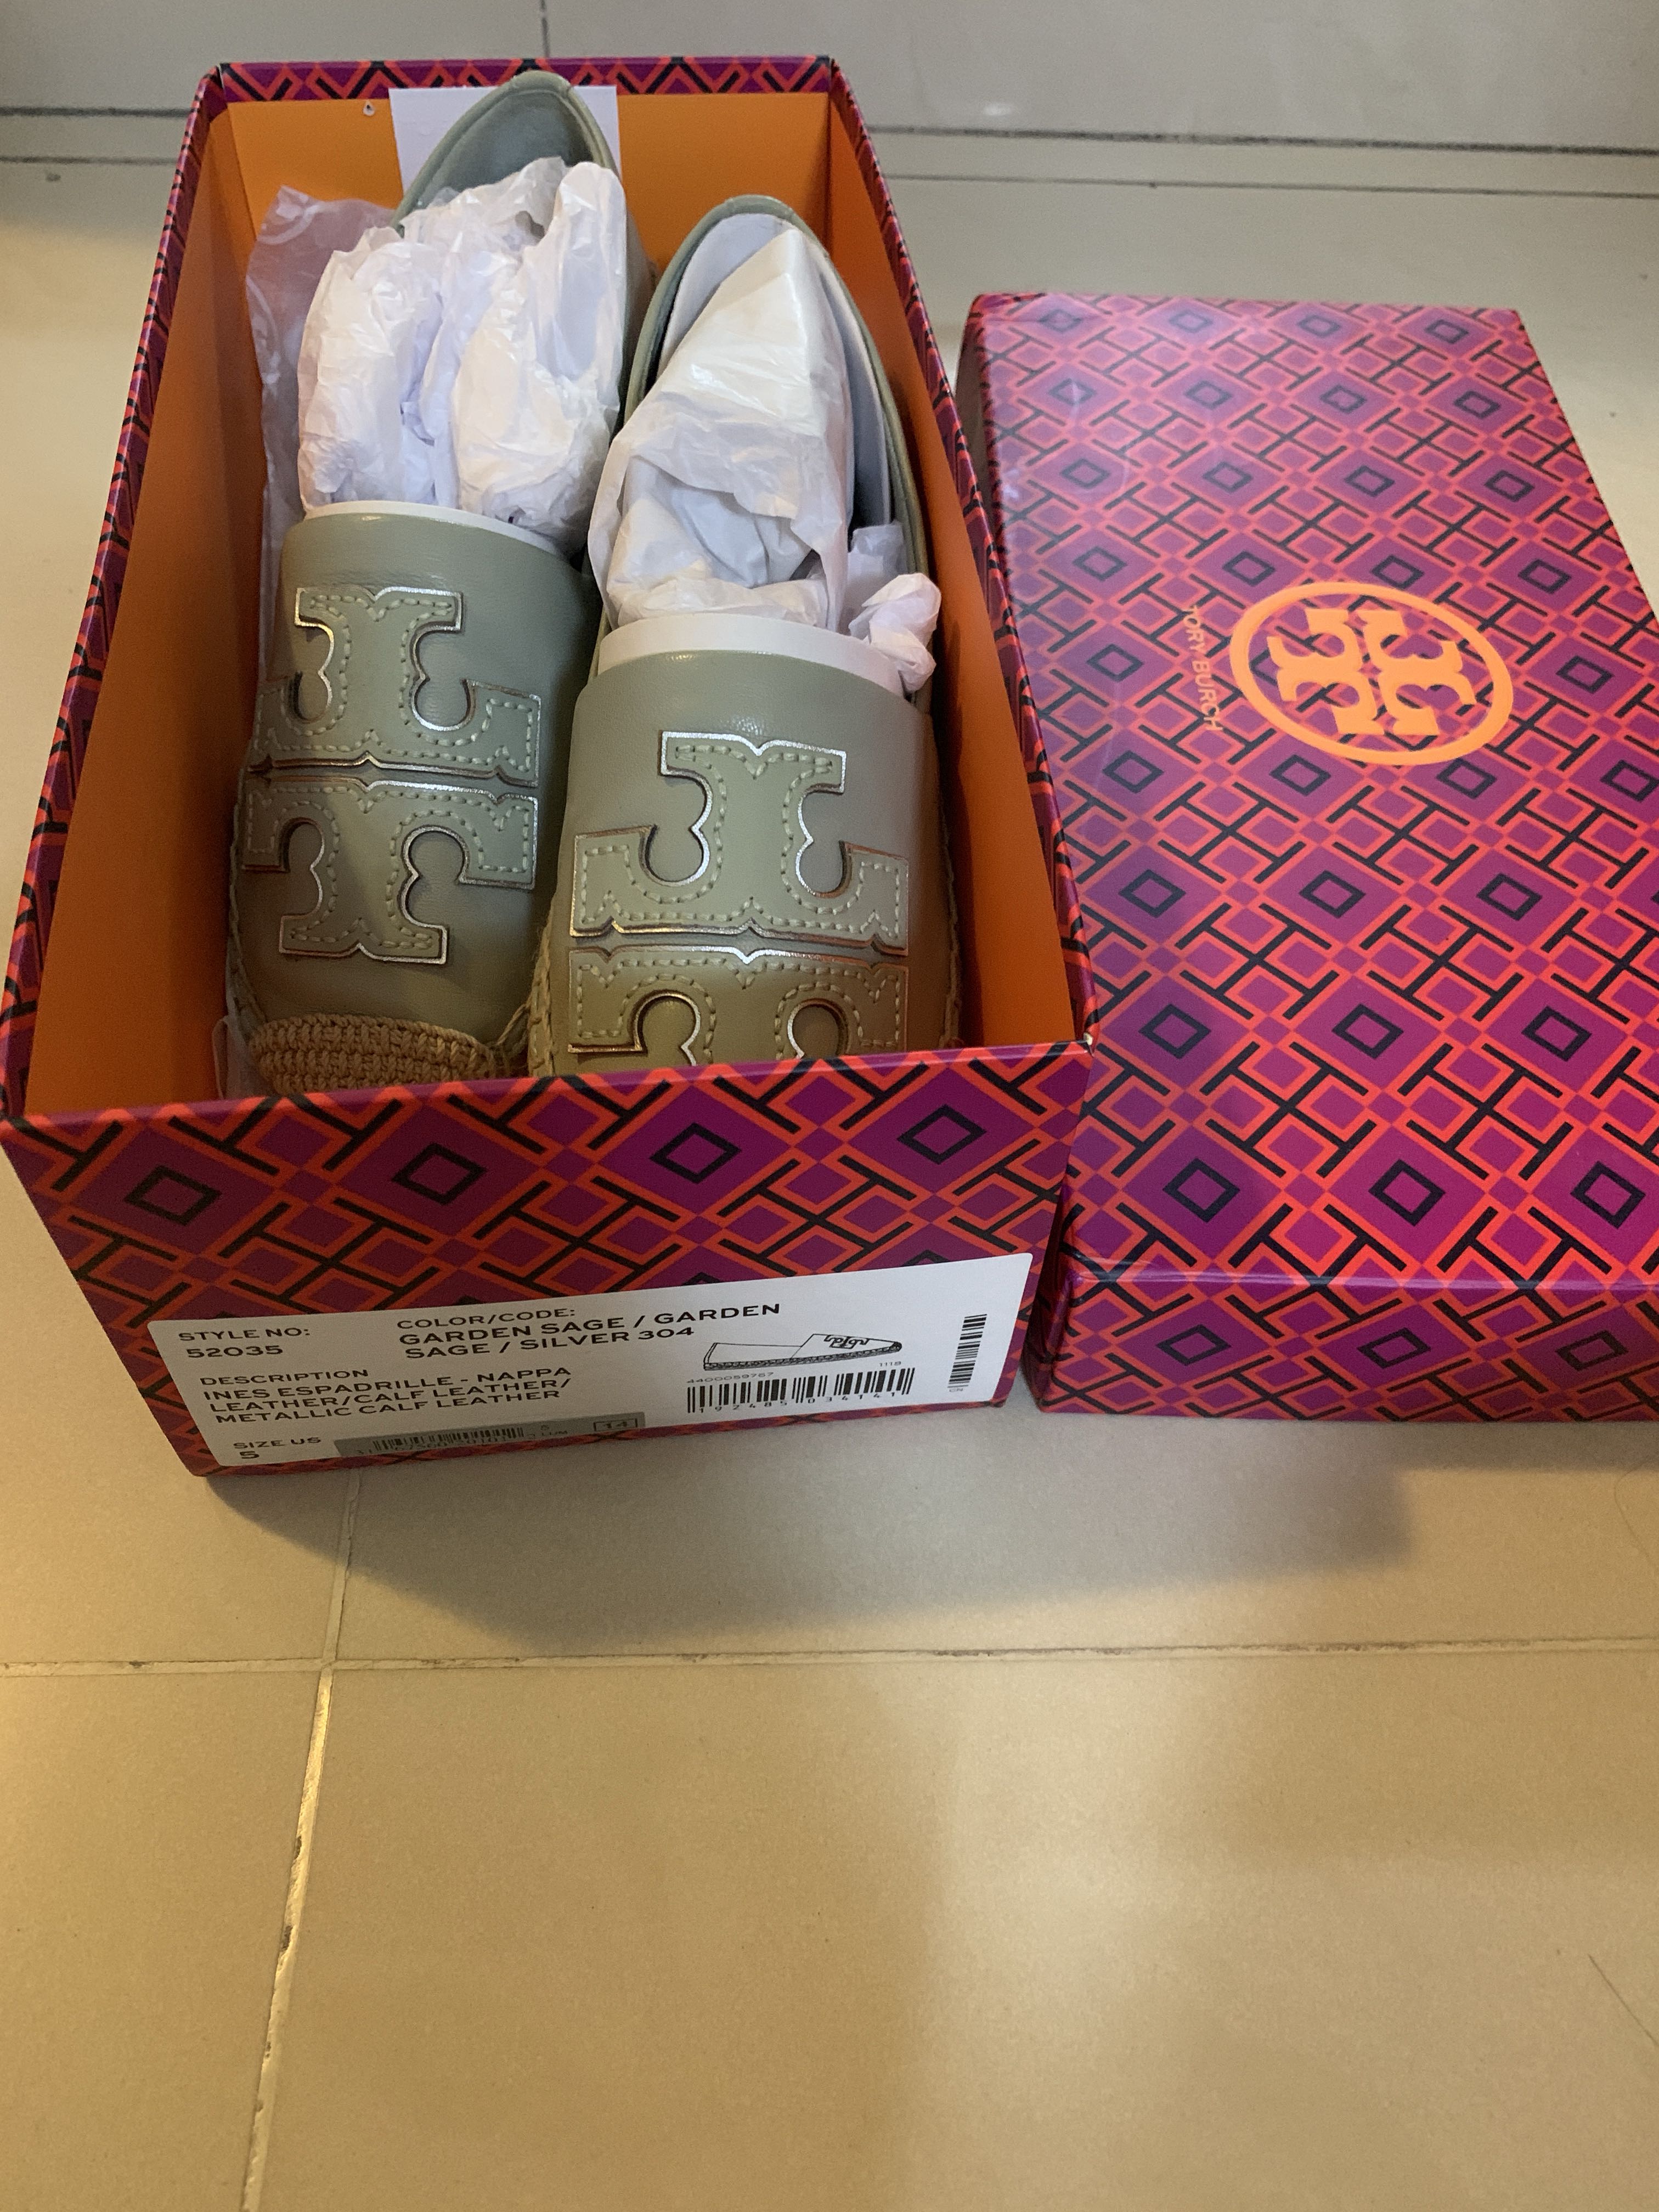 Tory Burch Ines Espadrille 52035 shoes, 名牌, 服裝- Carousell